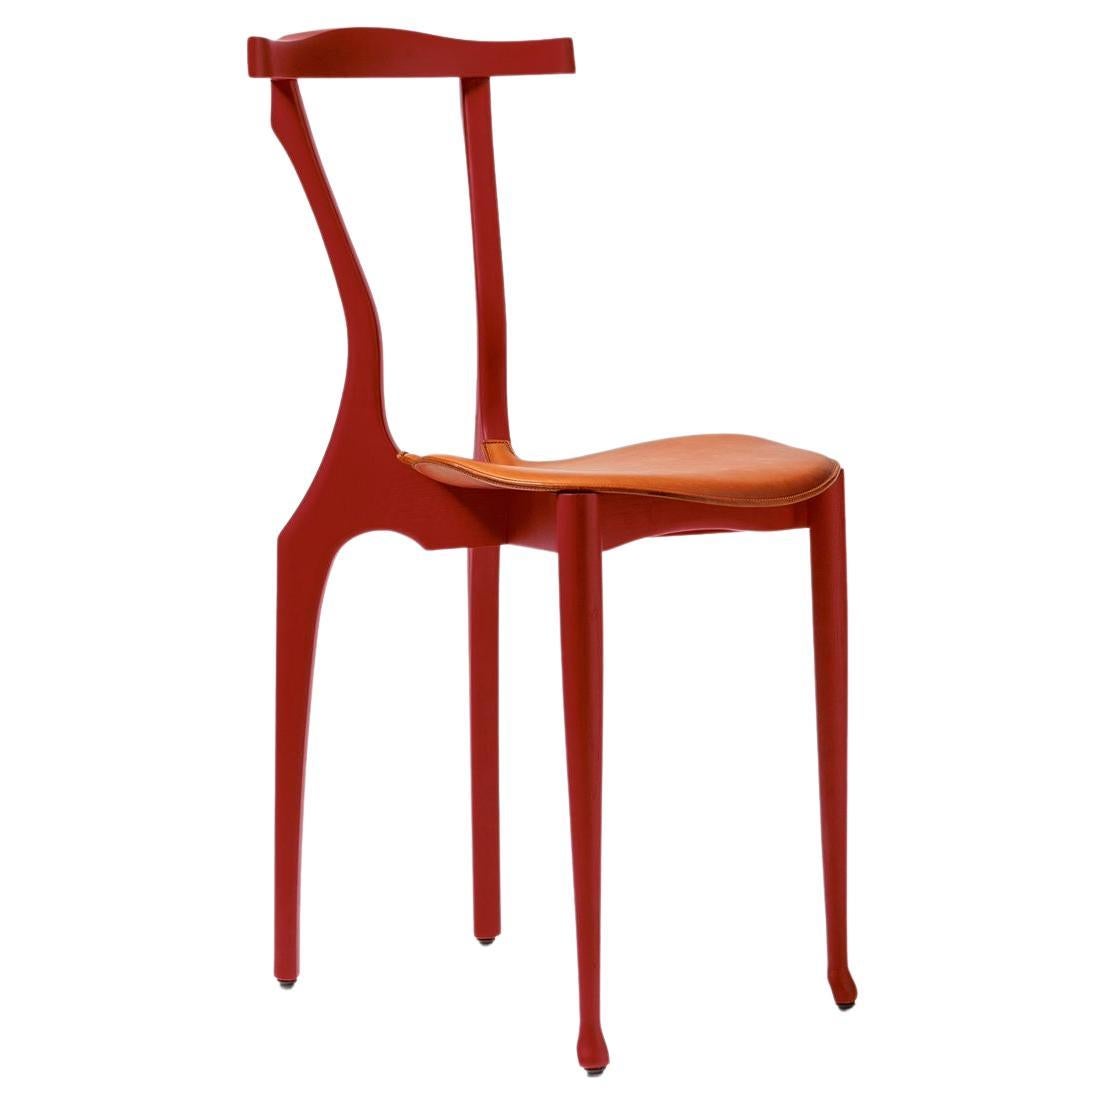 Contemporary "Gaulinetta" Dining Chair Red Lacquered Ash Wood by Oscar Tusquets